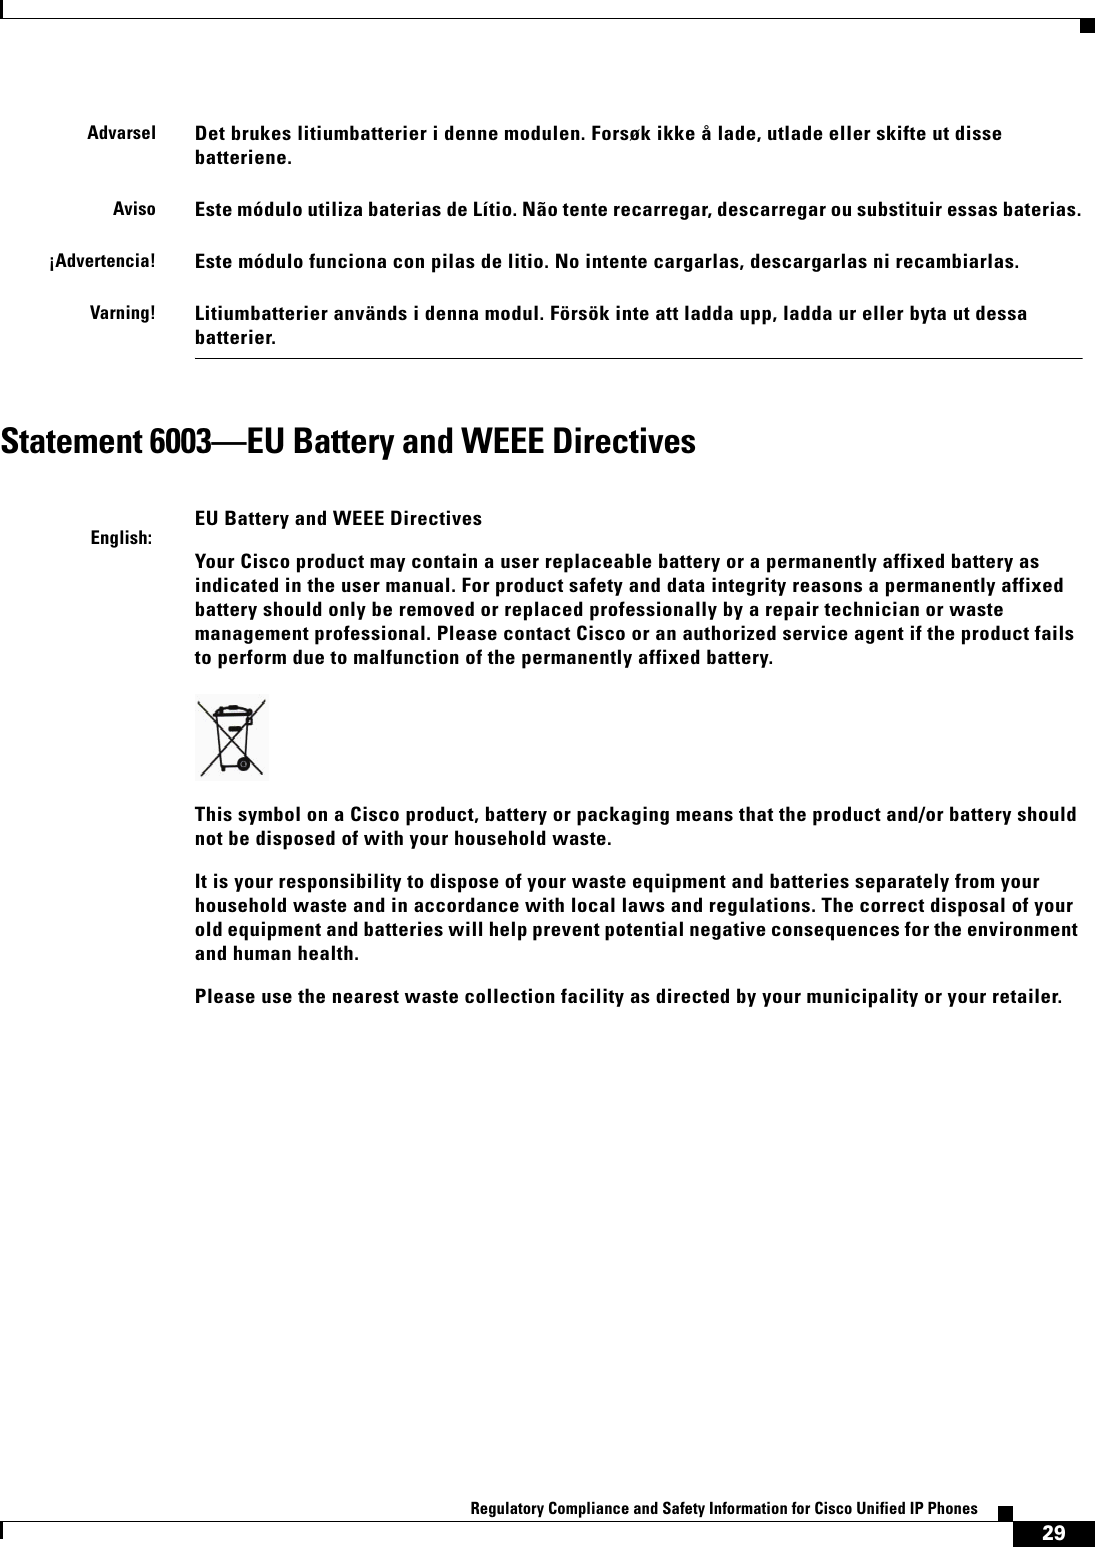  29Regulatory Compliance and Safety Information for Cisco Unified IP Phones Statement 6003—EU Battery and WEEE DirectivesAdvarselDet brukes litiumbatterier i denne modulen. Forsøk ikke å lade, utlade eller skifte ut disse batteriene. AvisoEste módulo utiliza baterias de Lítio. Não tente recarregar, descarregar ou substituir essas baterias.¡Advertencia!Este módulo funciona con pilas de litio. No intente cargarlas, descargarlas ni recambiarlas.Varning!Litiumbatterier används i denna modul. Försök inte att ladda upp, ladda ur eller byta ut dessa batterier.English:EU Battery and WEEE DirectivesYour Cisco product may contain a user replaceable battery or a permanently affixed battery as indicated in the user manual. For product safety and data integrity reasons a permanently affixed battery should only be removed or replaced professionally by a repair technician or waste management professional. Please contact Cisco or an authorized service agent if the product fails to perform due to malfunction of the permanently affixed battery.This symbol on a Cisco product, battery or packaging means that the product and/or battery should not be disposed of with your household waste.It is your responsibility to dispose of your waste equipment and batteries separately from your household waste and in accordance with local laws and regulations. The correct disposal of your old equipment and batteries will help prevent potential negative consequences for the environment and human health.Please use the nearest waste collection facility as directed by your municipality or your retailer.